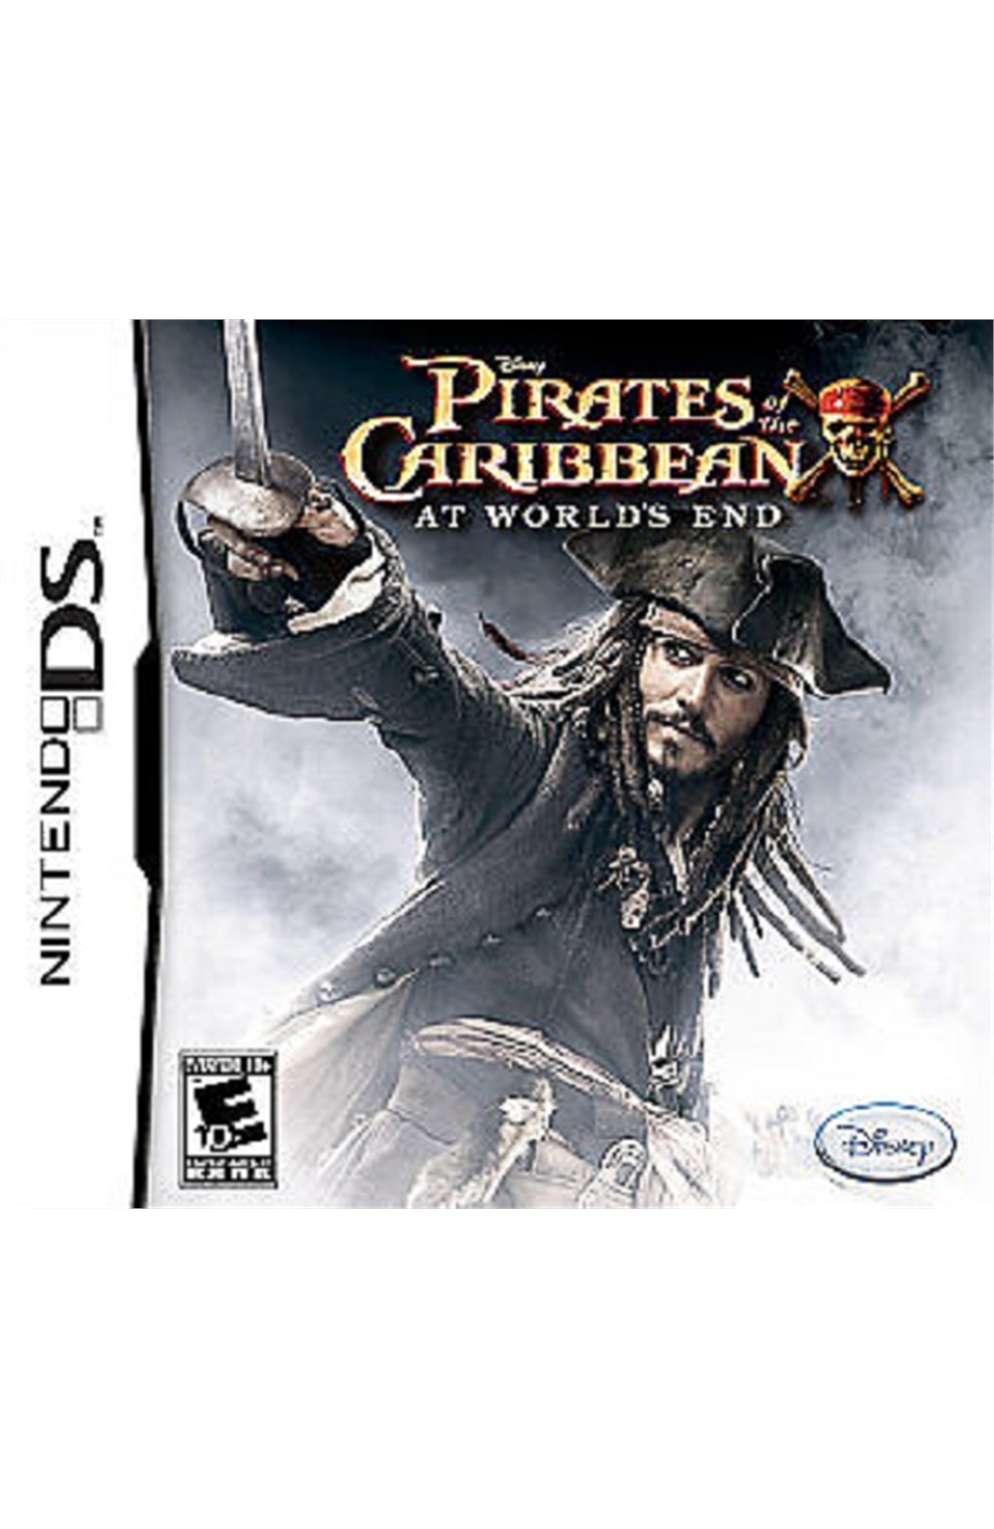 Nintendo Ds Nds Pirates of the Caribbean